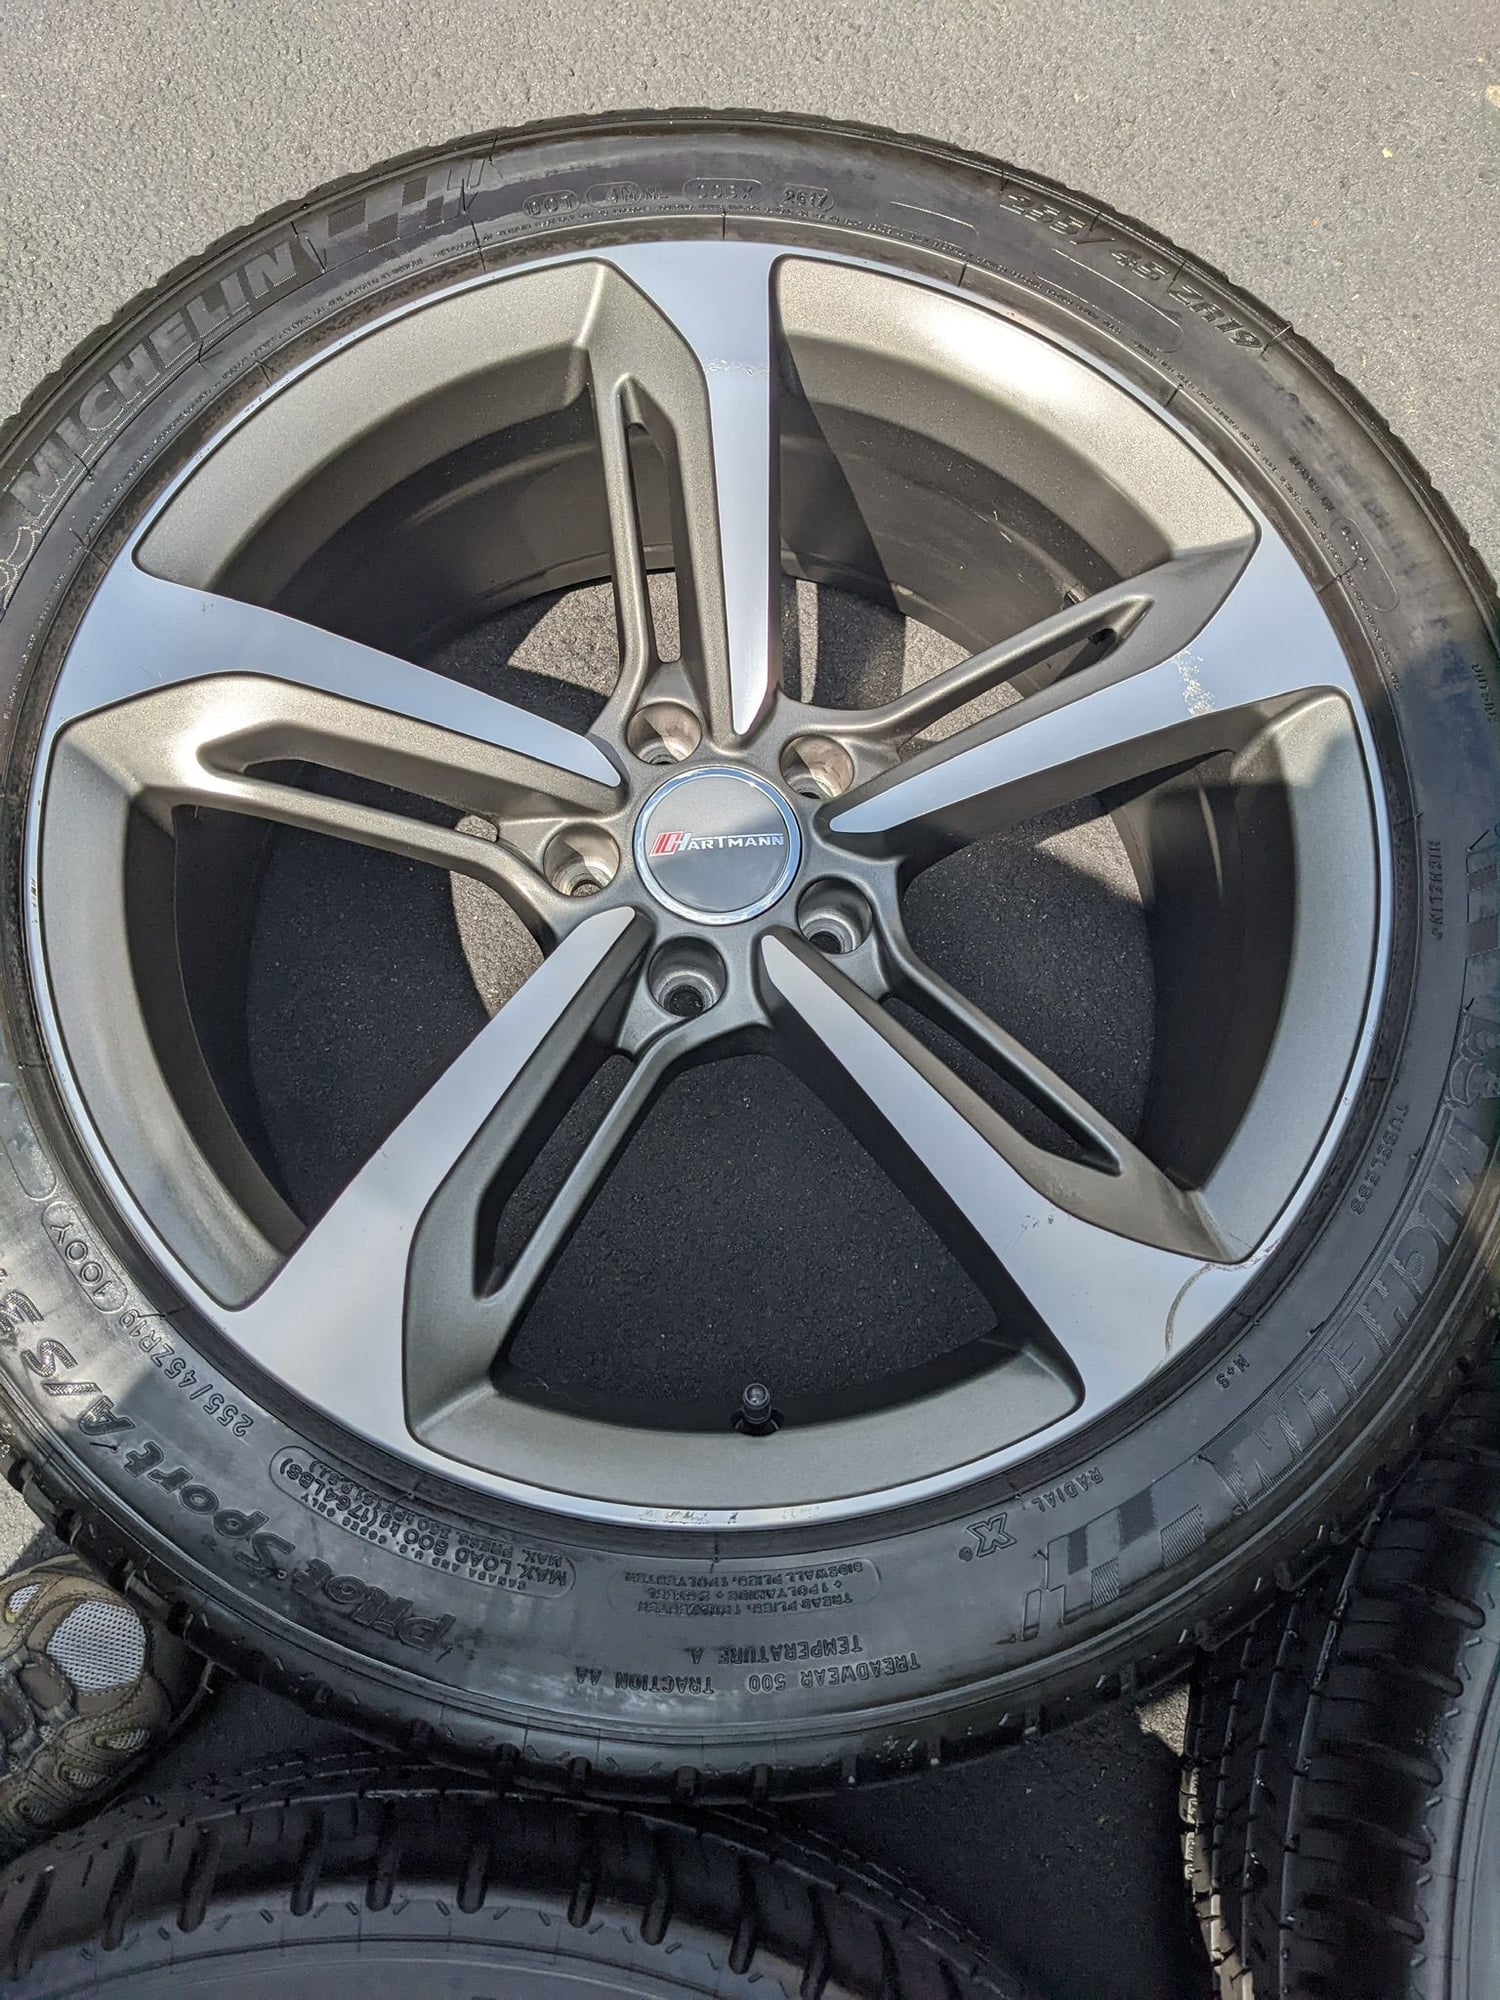 Wheels and Tires/Axles - Michelin Pilot Sport All Season 255/45ZR19 on Hartmann Wheels - Used - 0  All Models - Kennett Square, PA 19348, United States